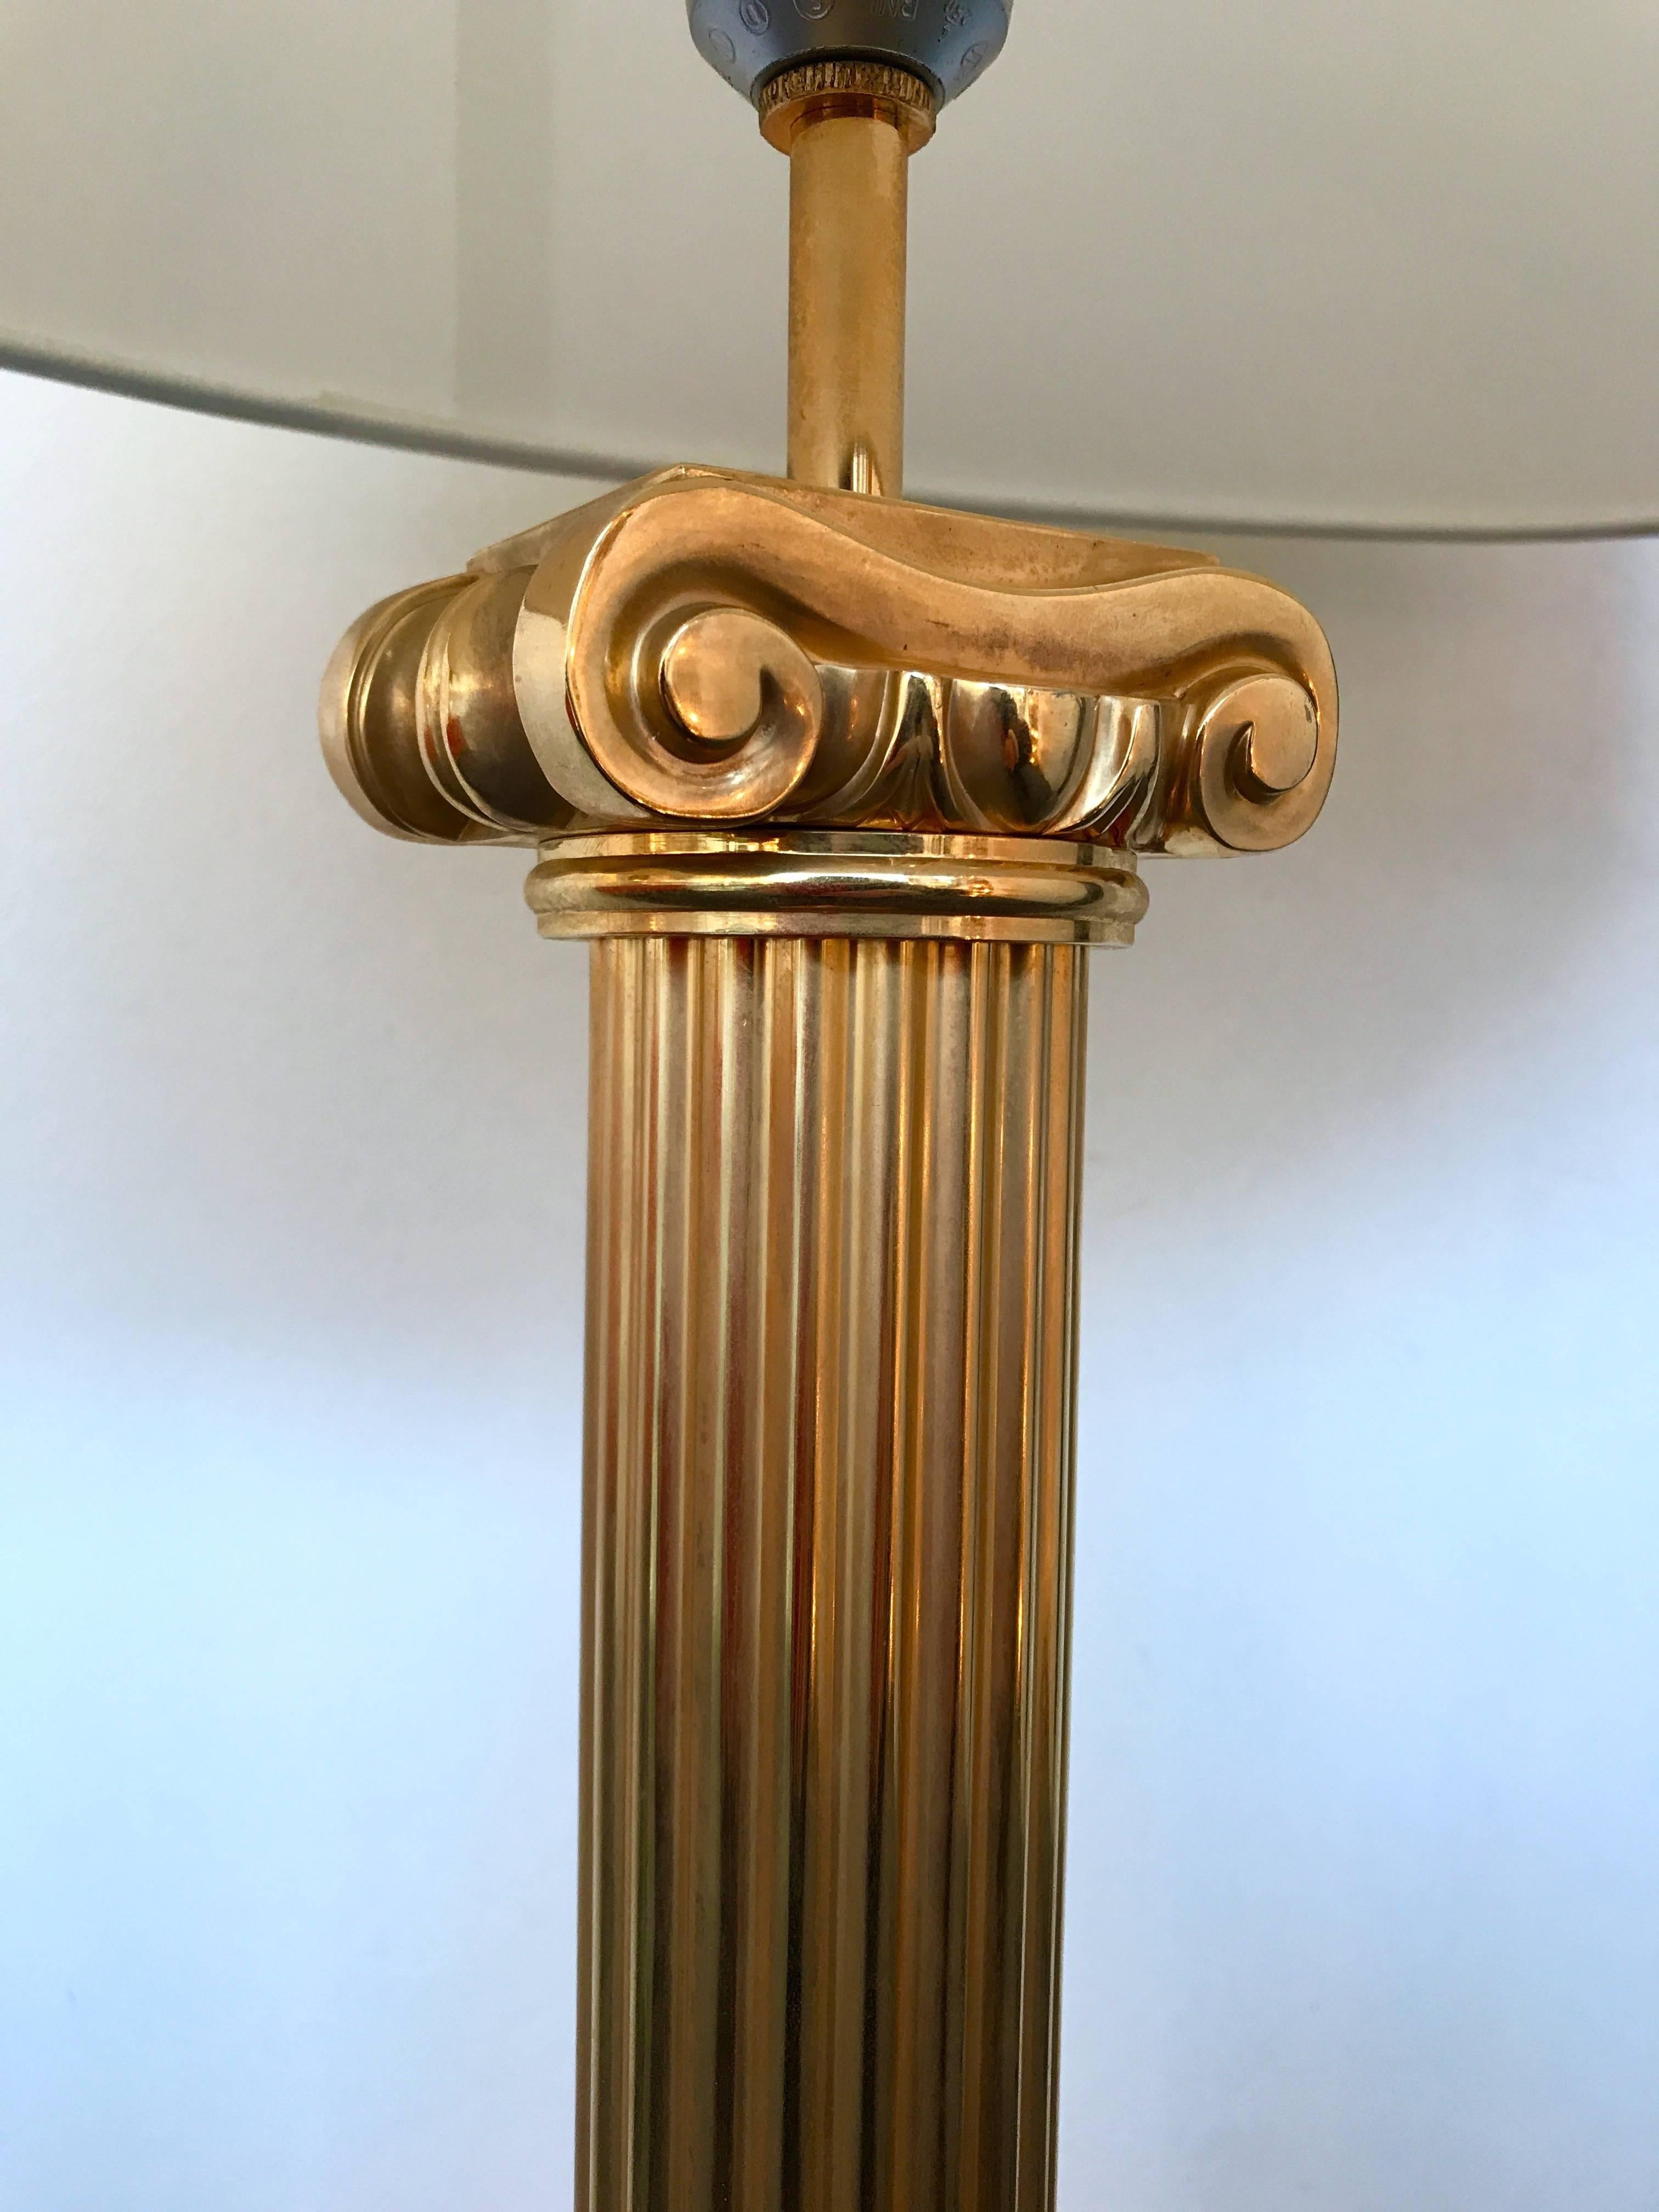 Iconic pair of brass column lamps by Jordan Sheffield Collection. Neo classical style. Full brass great quality, heavy lamps. Famous manufacture like Maison Charles, Jansen, Bagues, Hollywood Regency.

NOTE : Demonstration shades not includ.